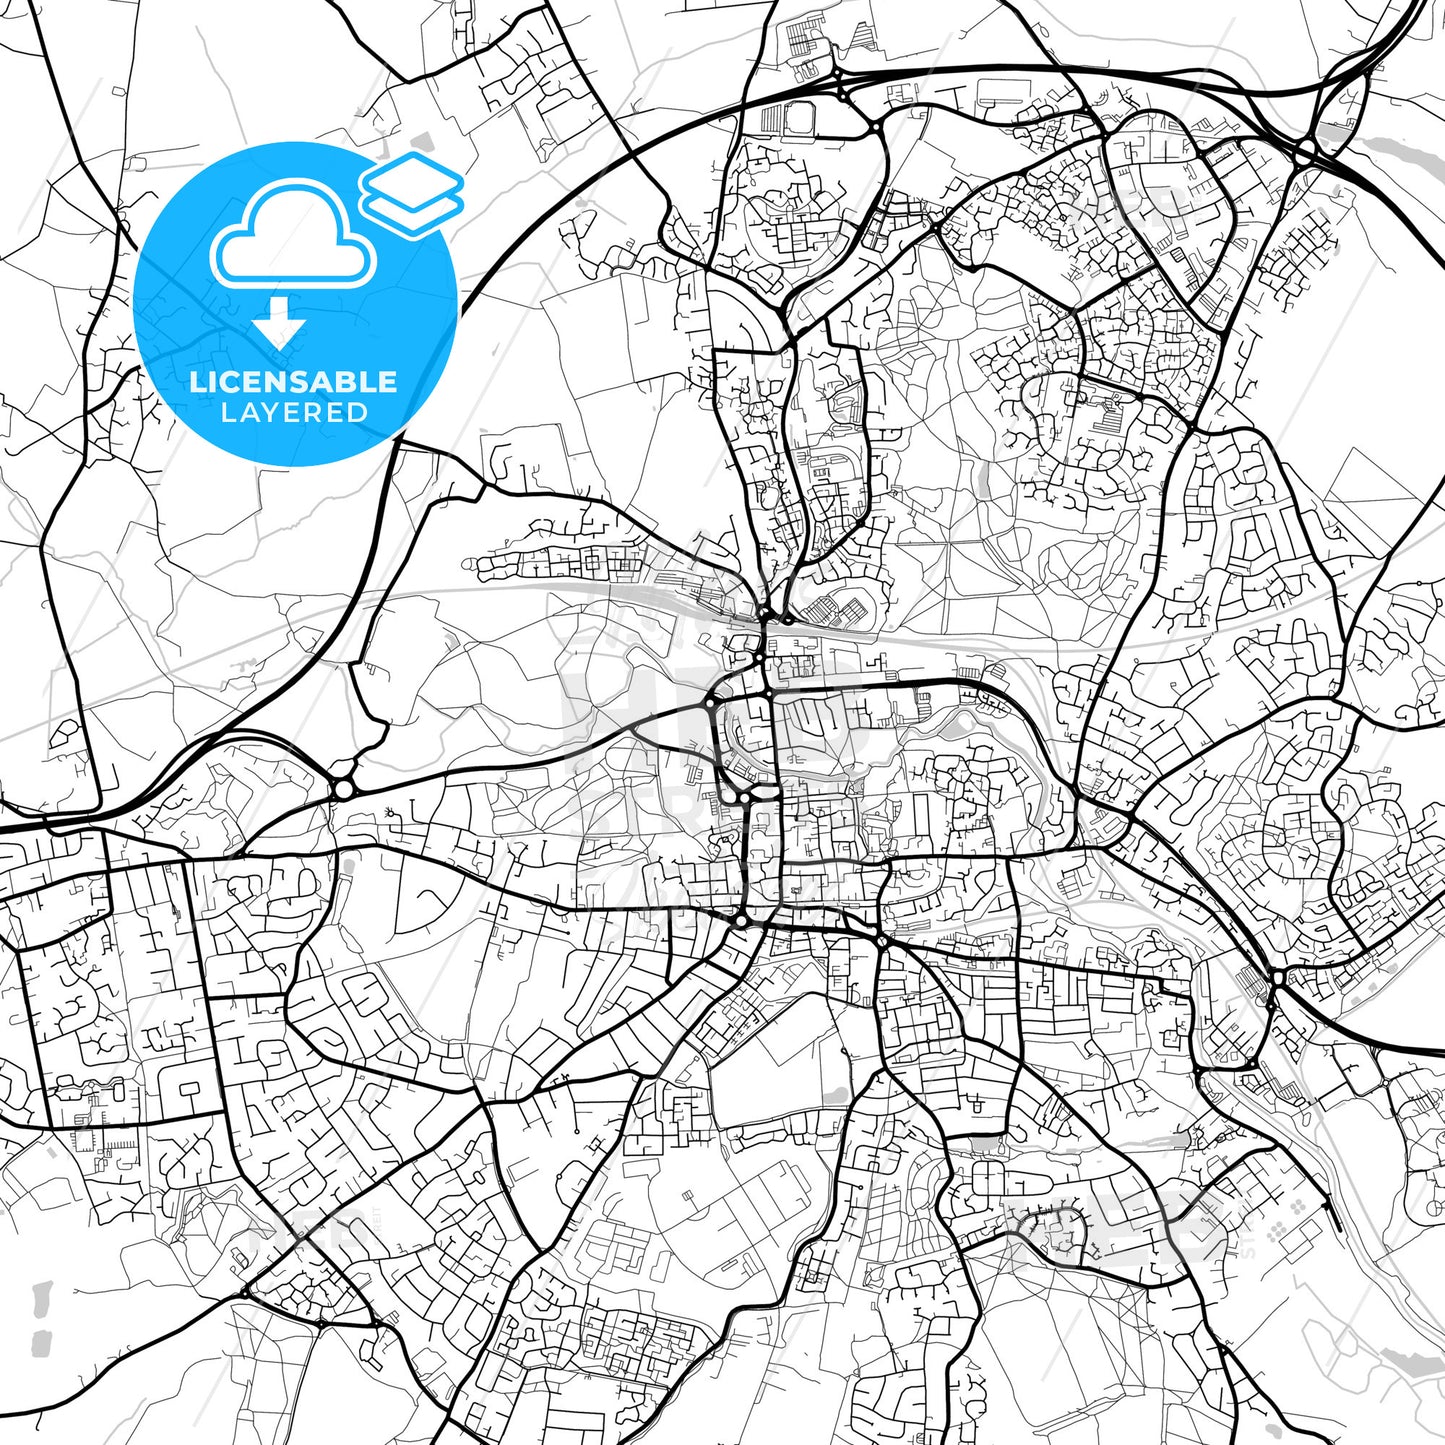 Layered PDF map of Colchester, East of England, England